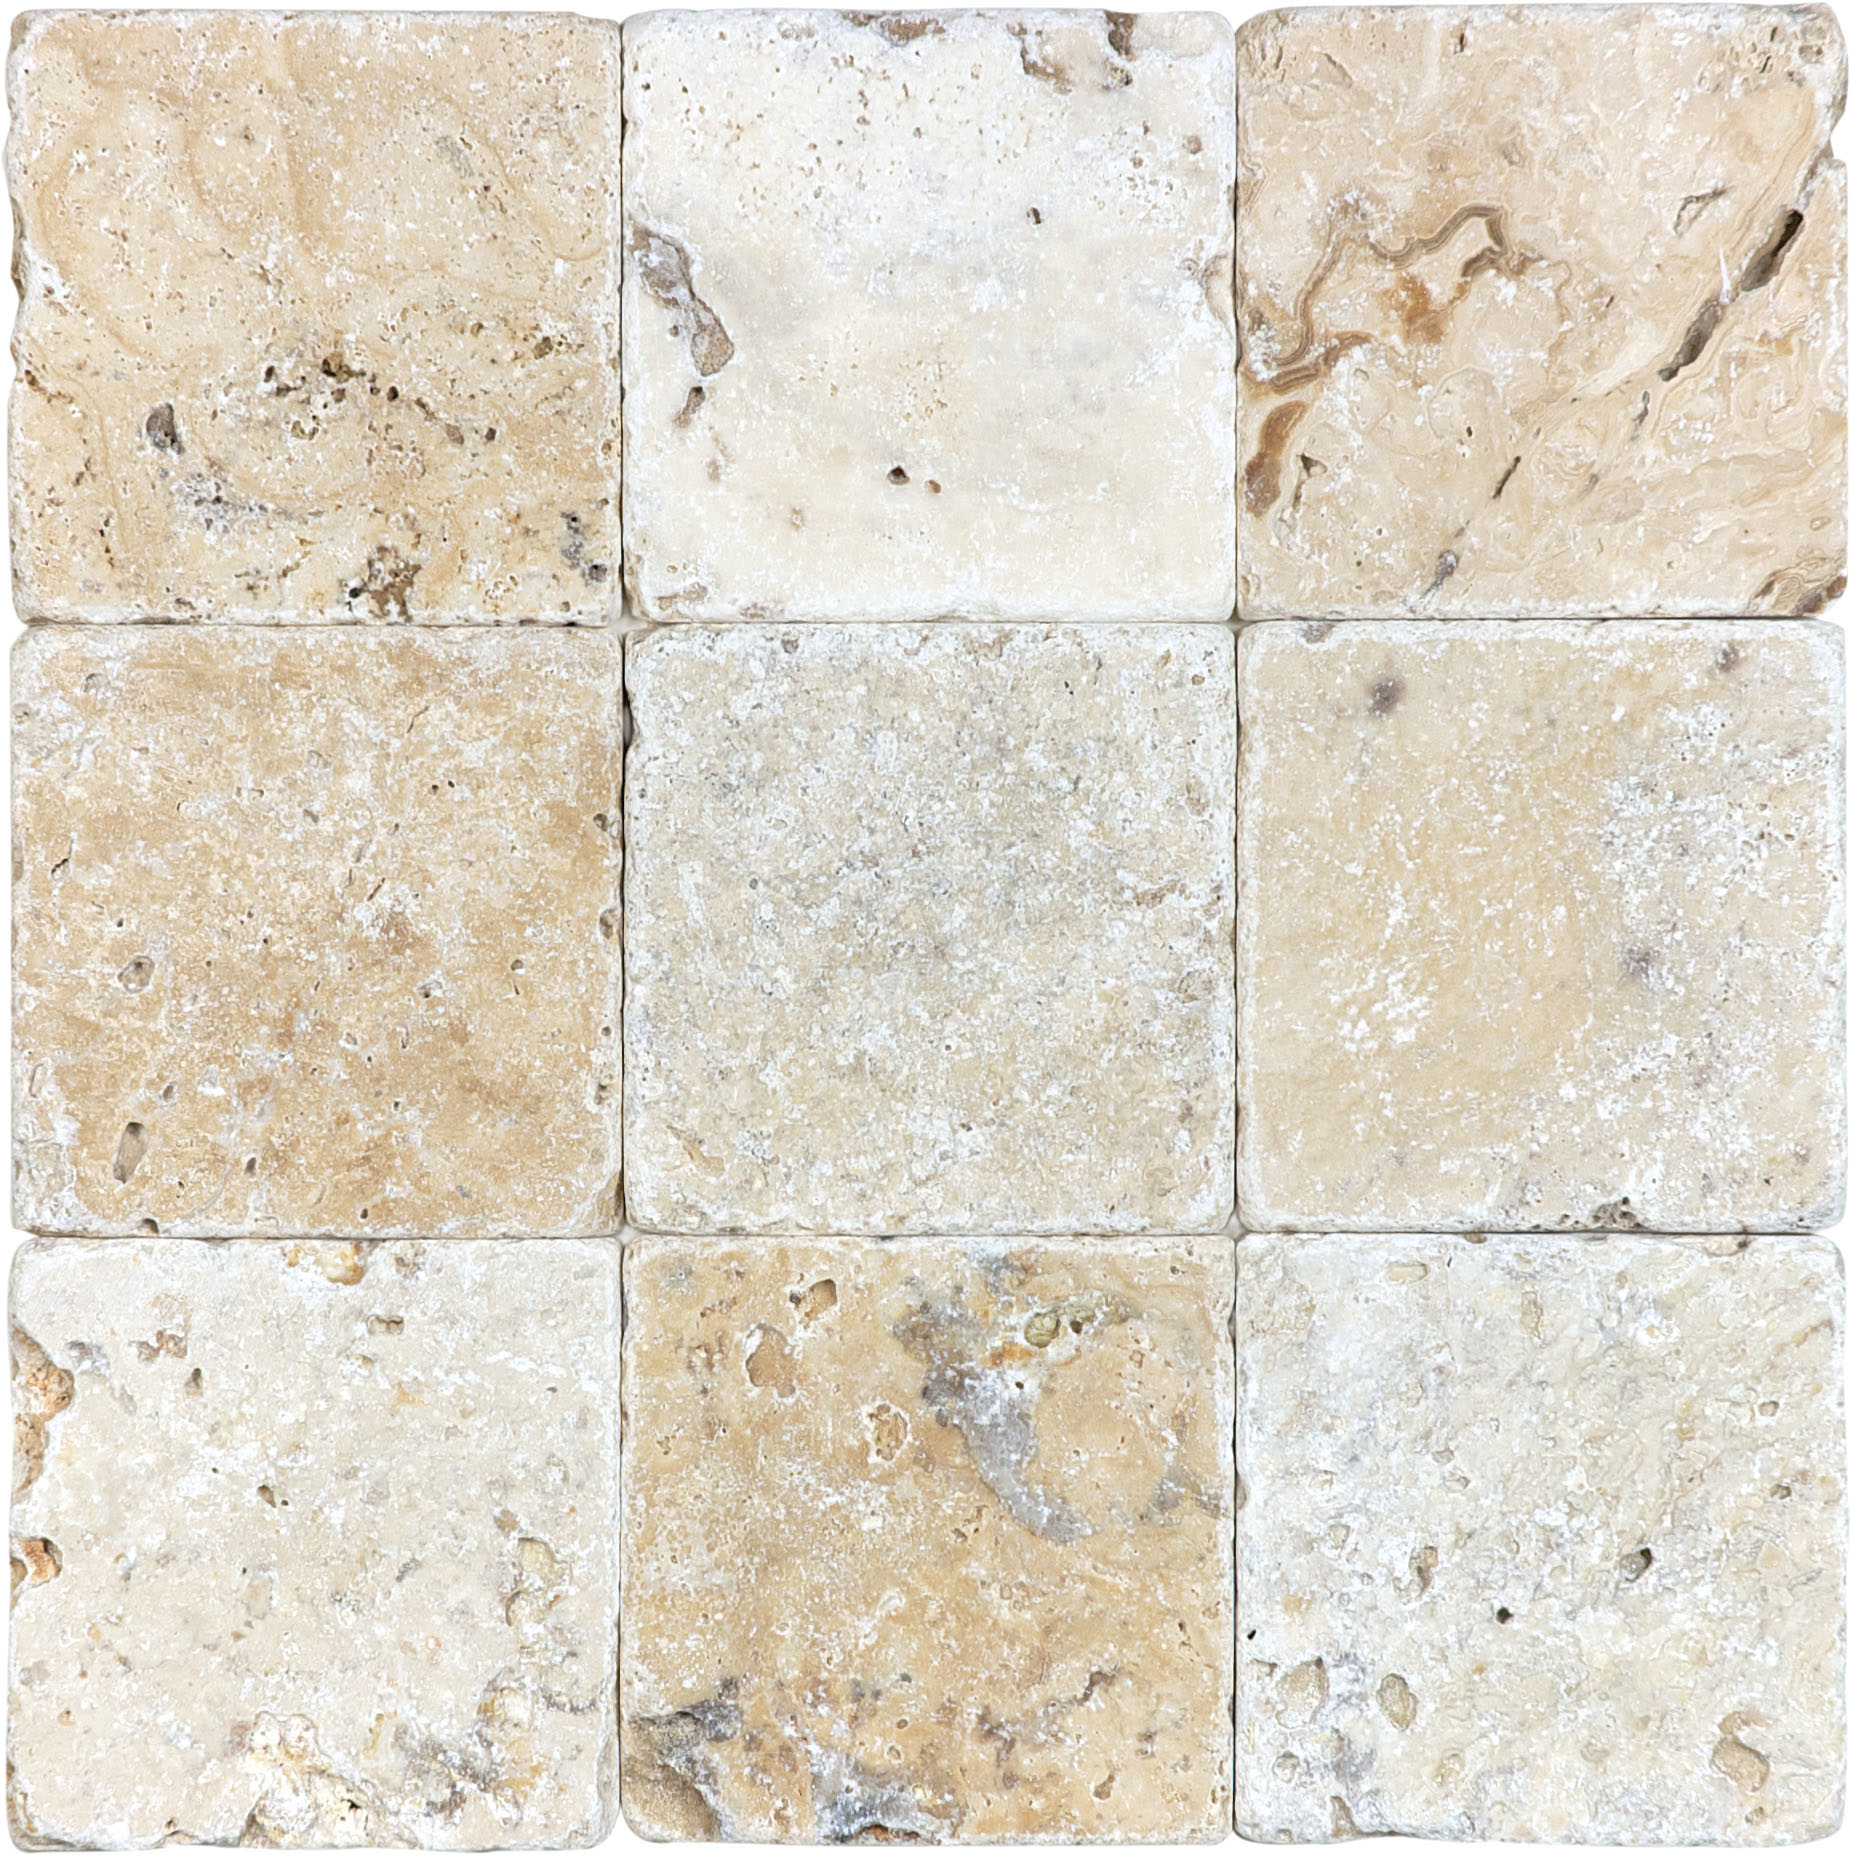 travertine pattern natural stone field tile from picasso anatolia collection distributed by surface group international tumbled finish tumbled edge 4x4 square shape